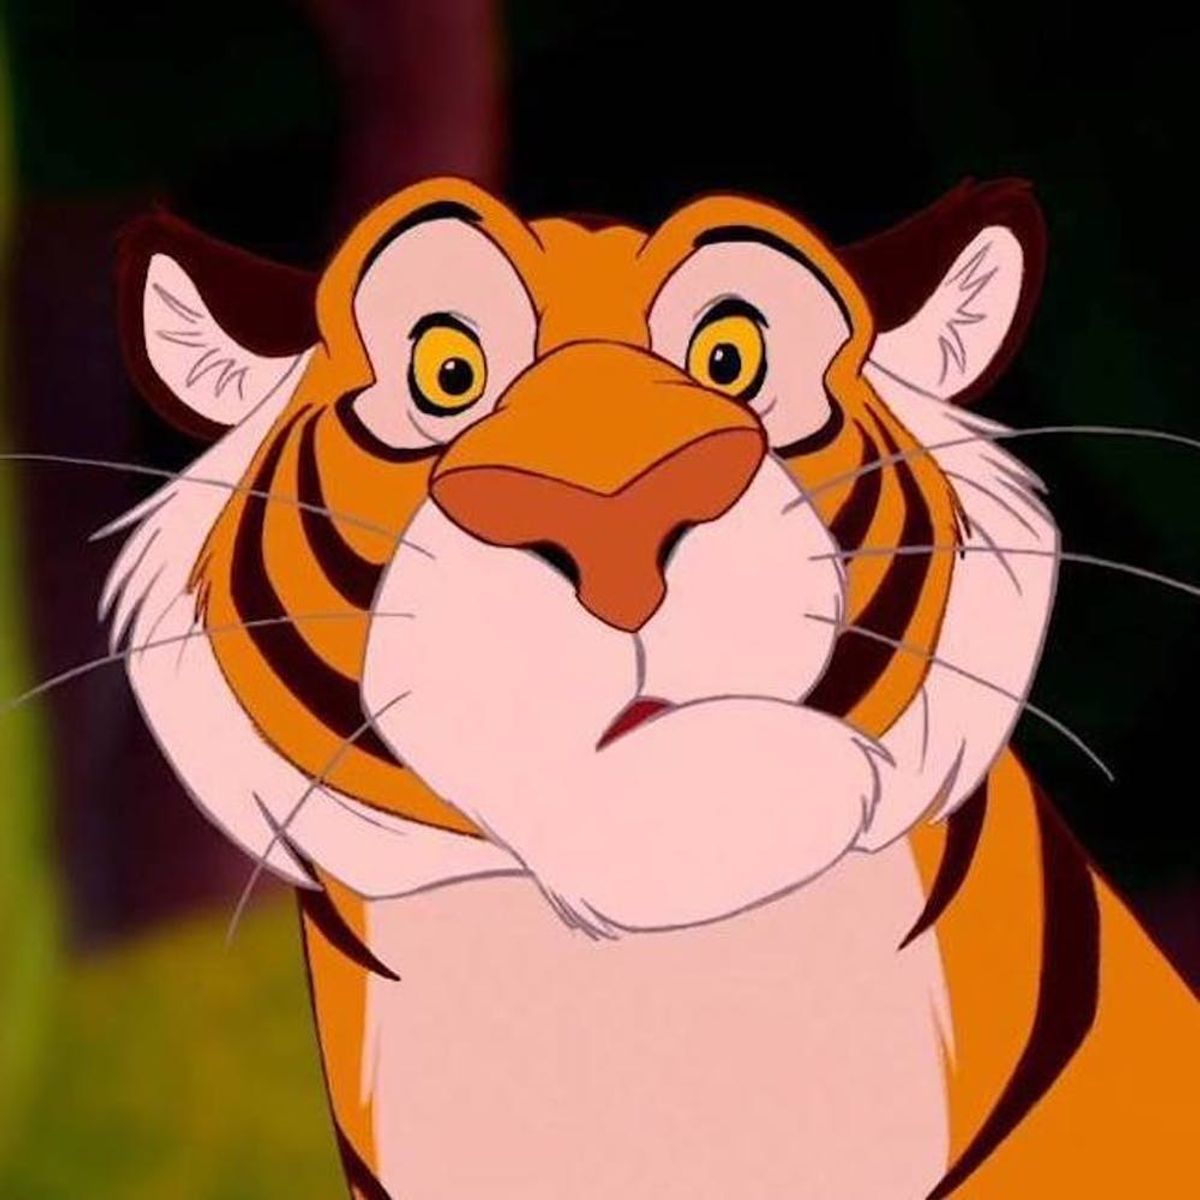 Disney’s Live-Action “Aladdin” Remake Is Cutting Rajah the Tiger to Make Way for a New Female Role